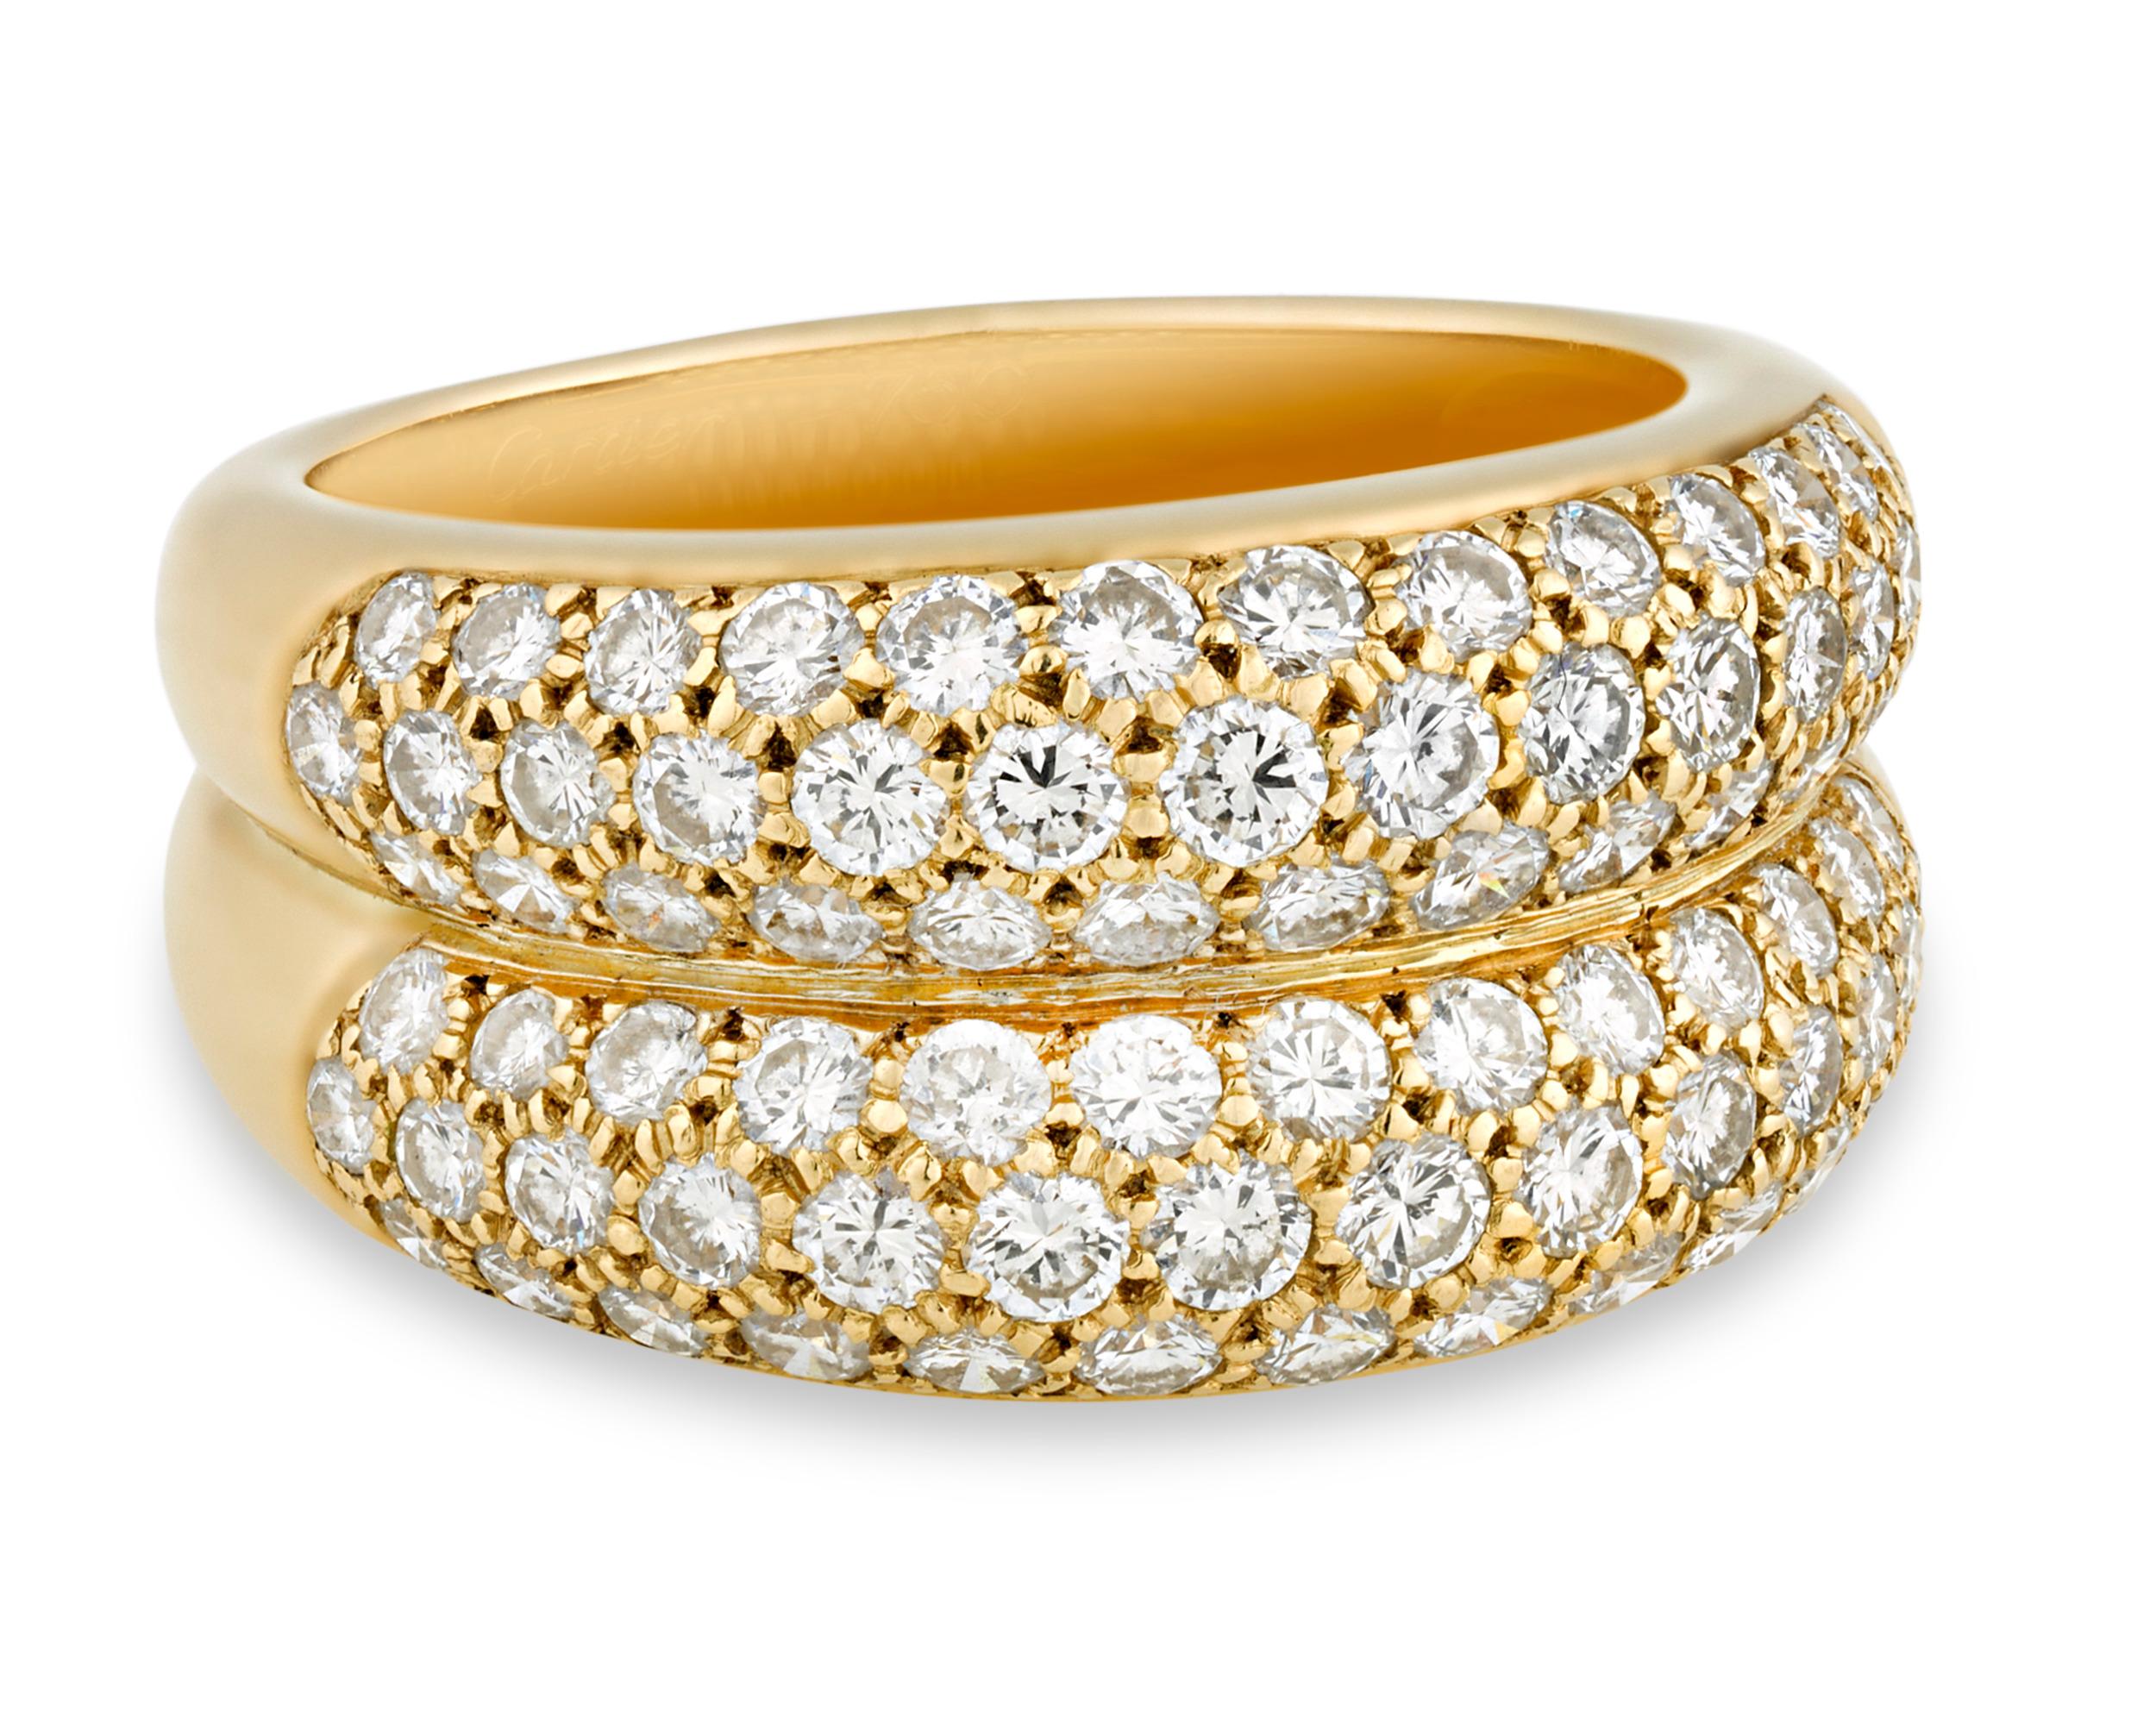 Two rows of brilliant pavé-set diamonds totaling approximately 2.50 carats form this dramatic bombe-style ring by the legendary Cartier. Combining exquisite gems and daring design, this 18K yellow gold ring is a standout example of retro cocktail